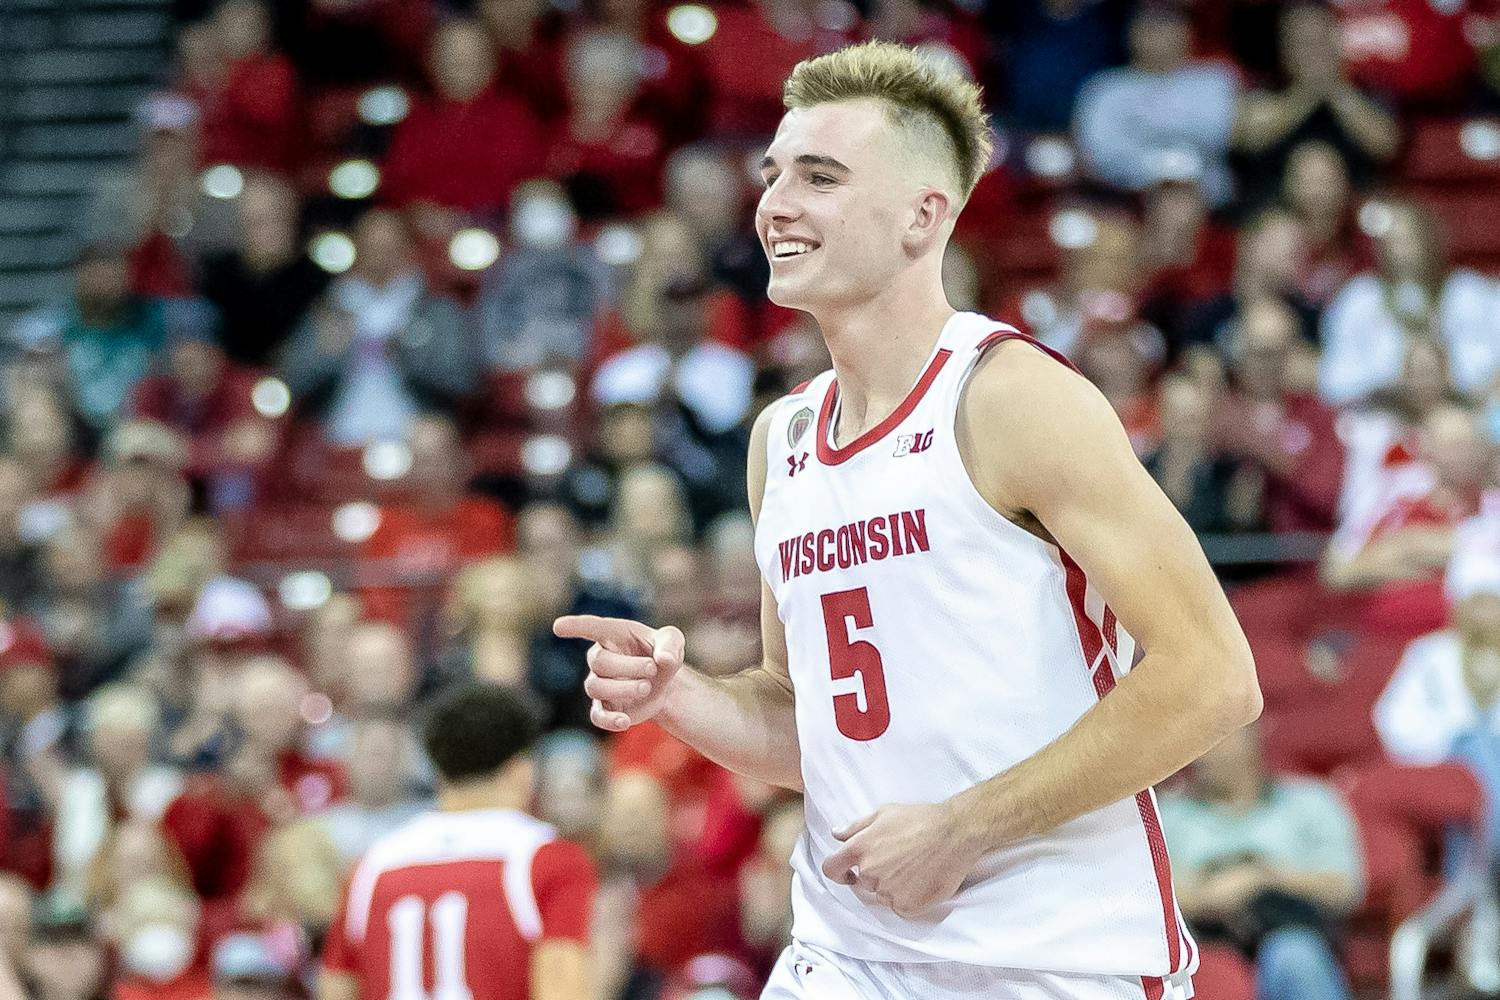 Iowa at Wisconsin 2021-22 college basketball game preview, TV schedule